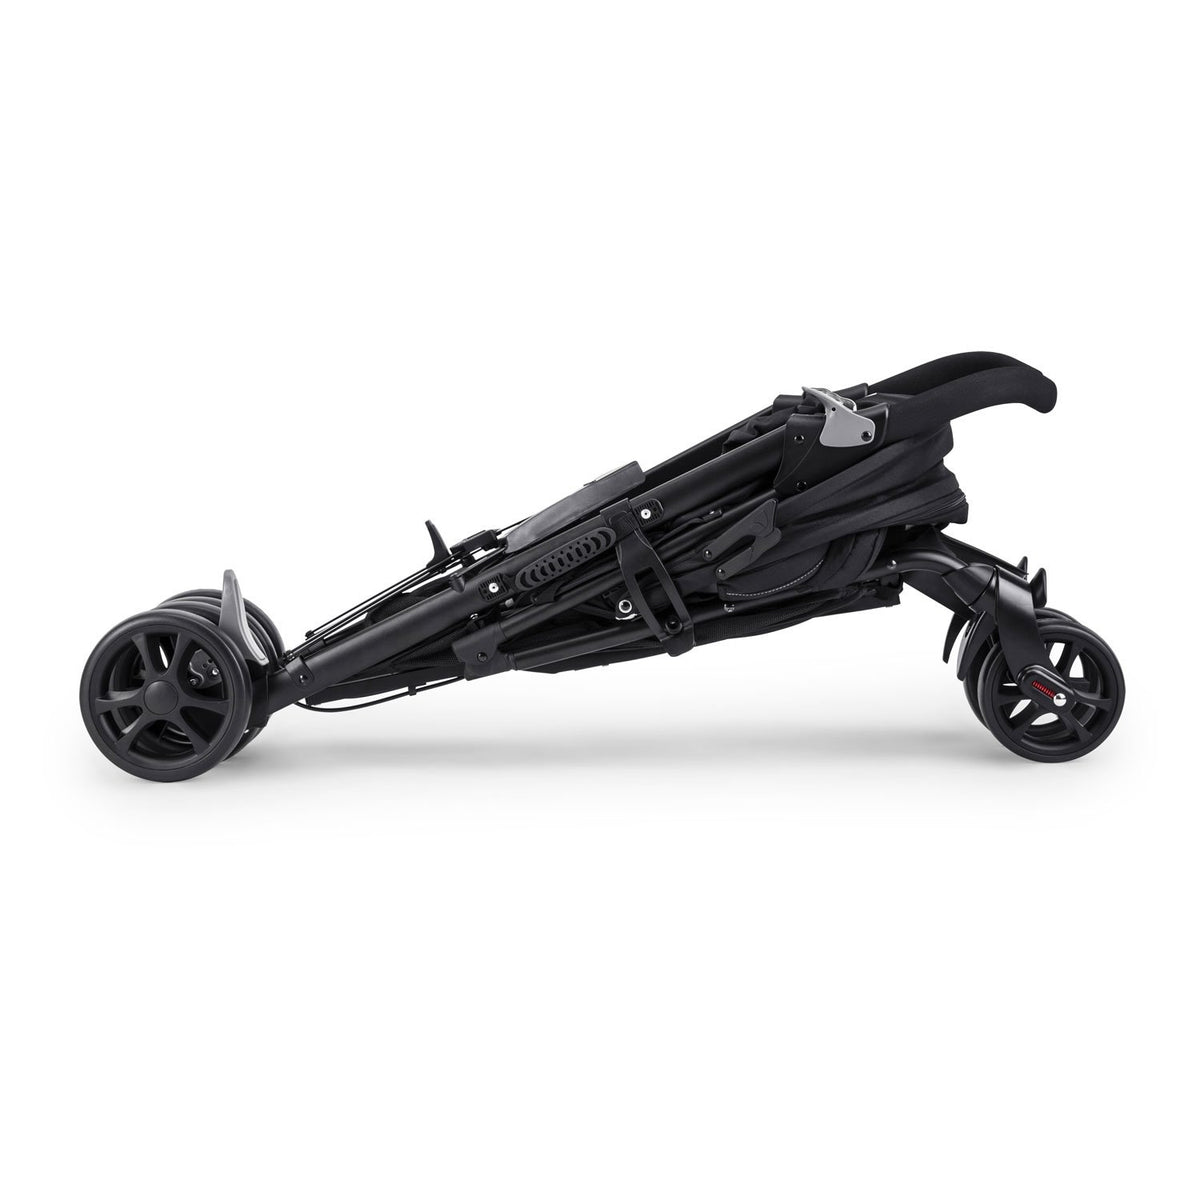 Joie Brisk LX Buggy Mullberry